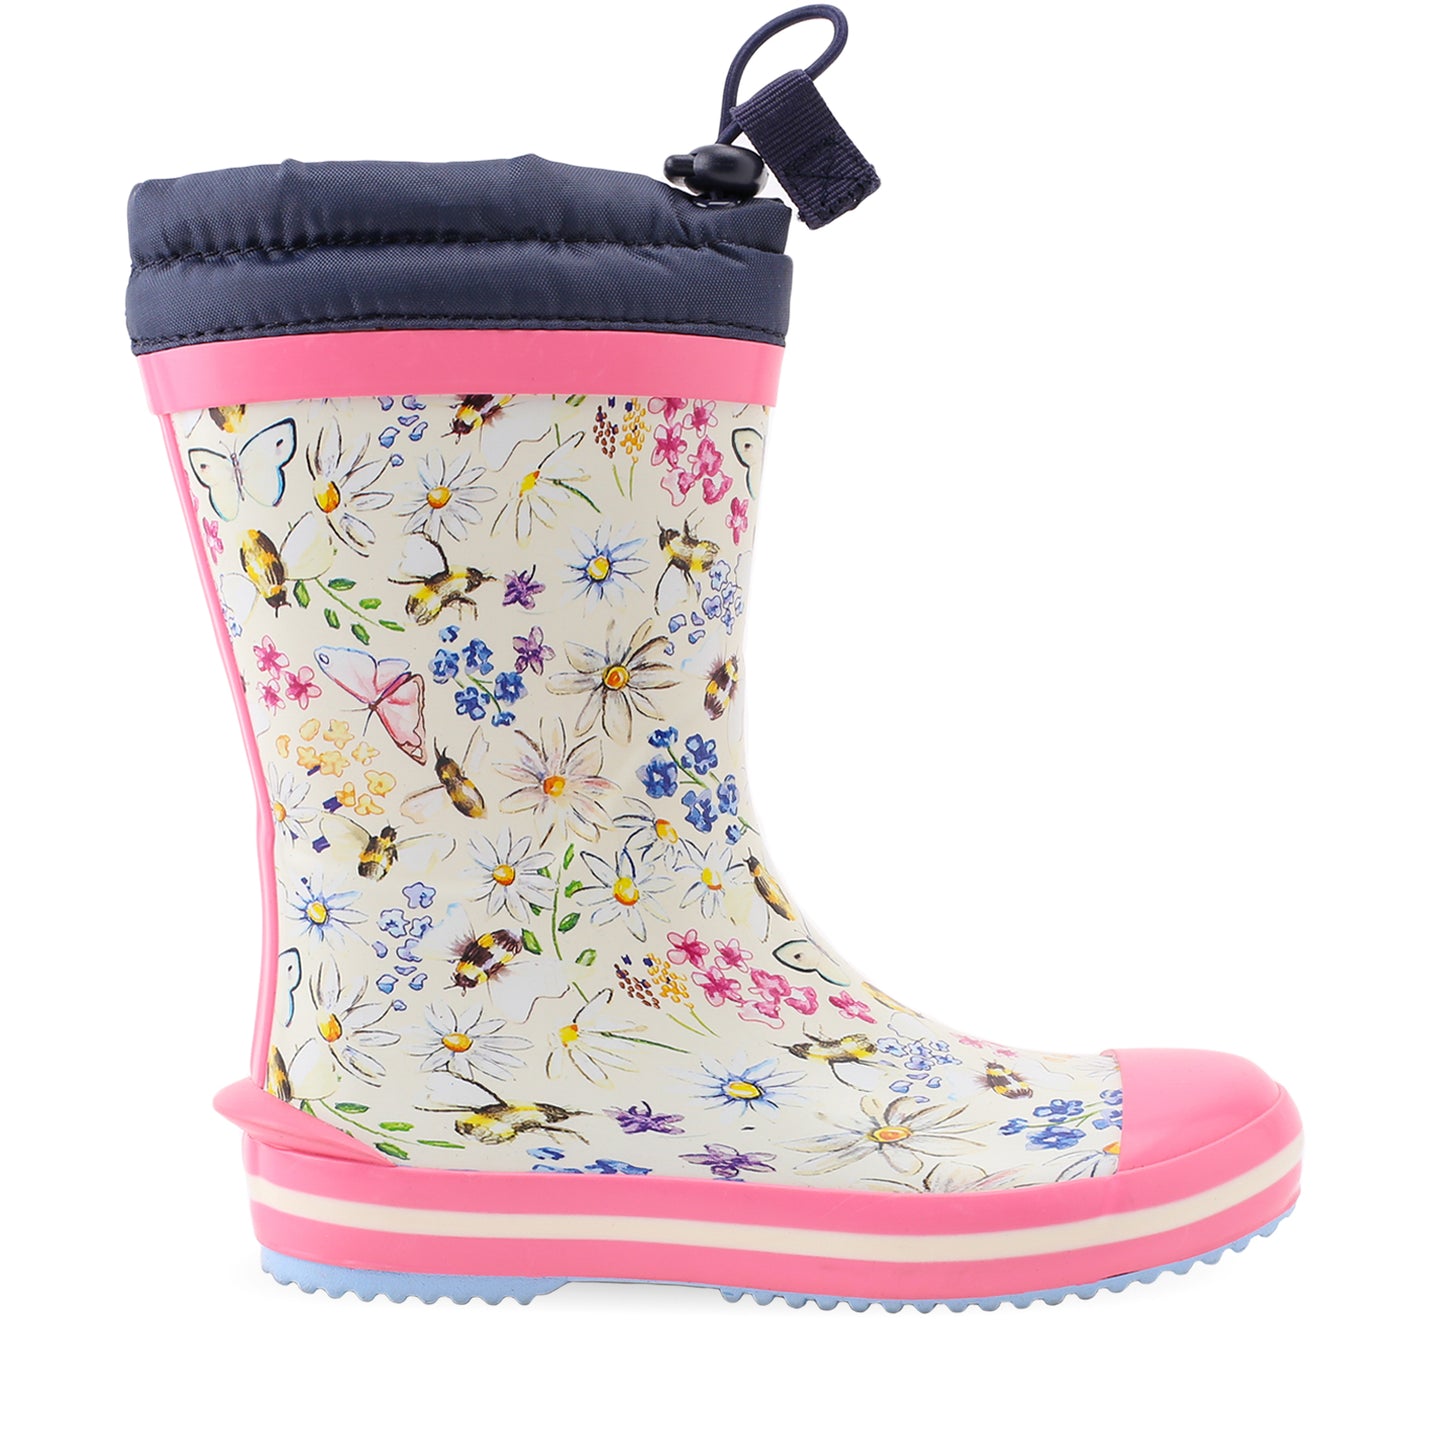 Start-Rite Big puddle Little puddle floral girls wellies